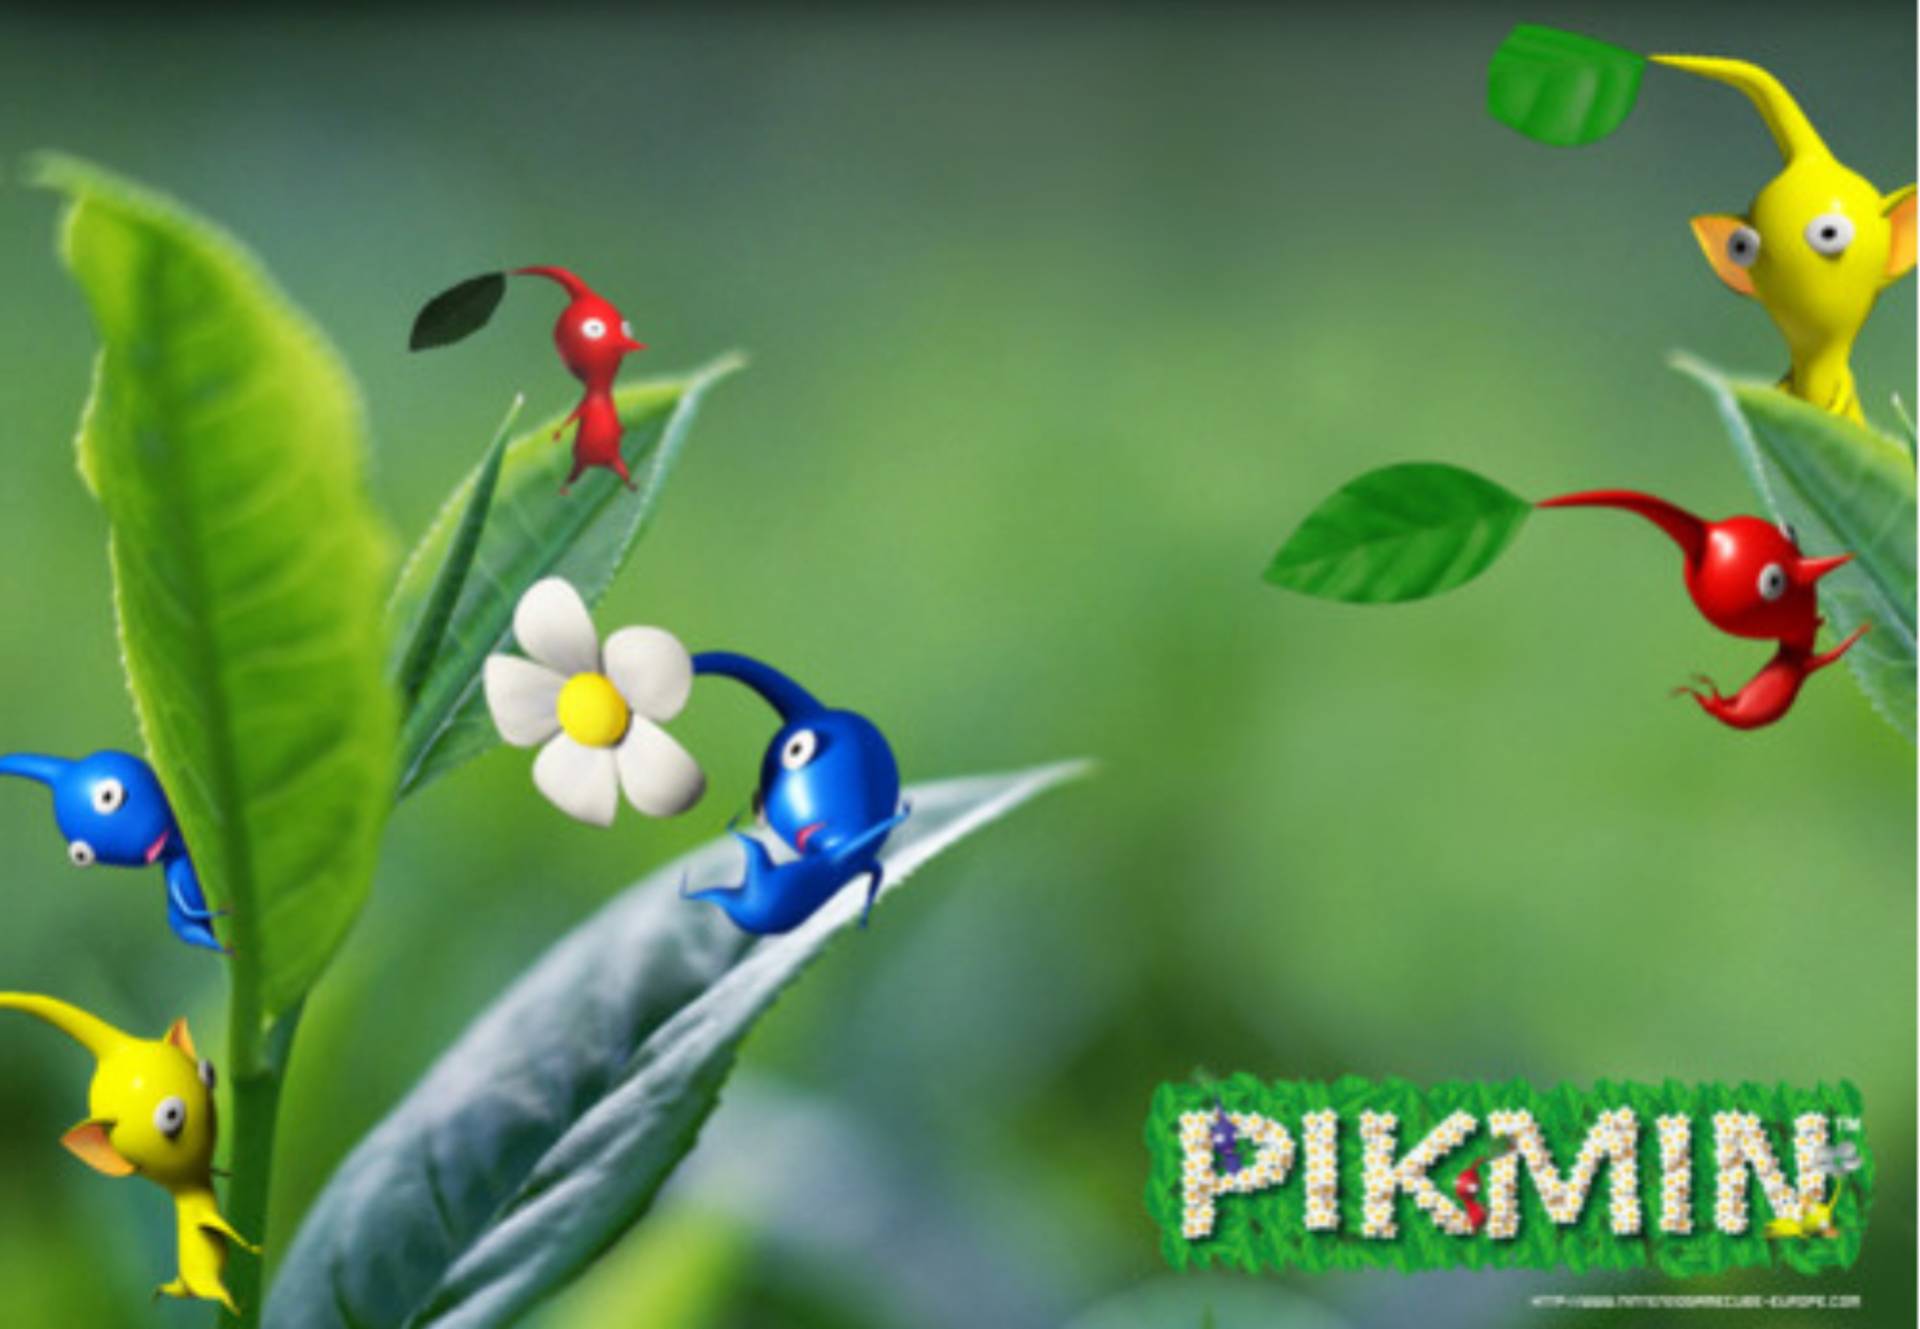 Pikmin Wallpaper In HD Gamingbolt Video Game News Res